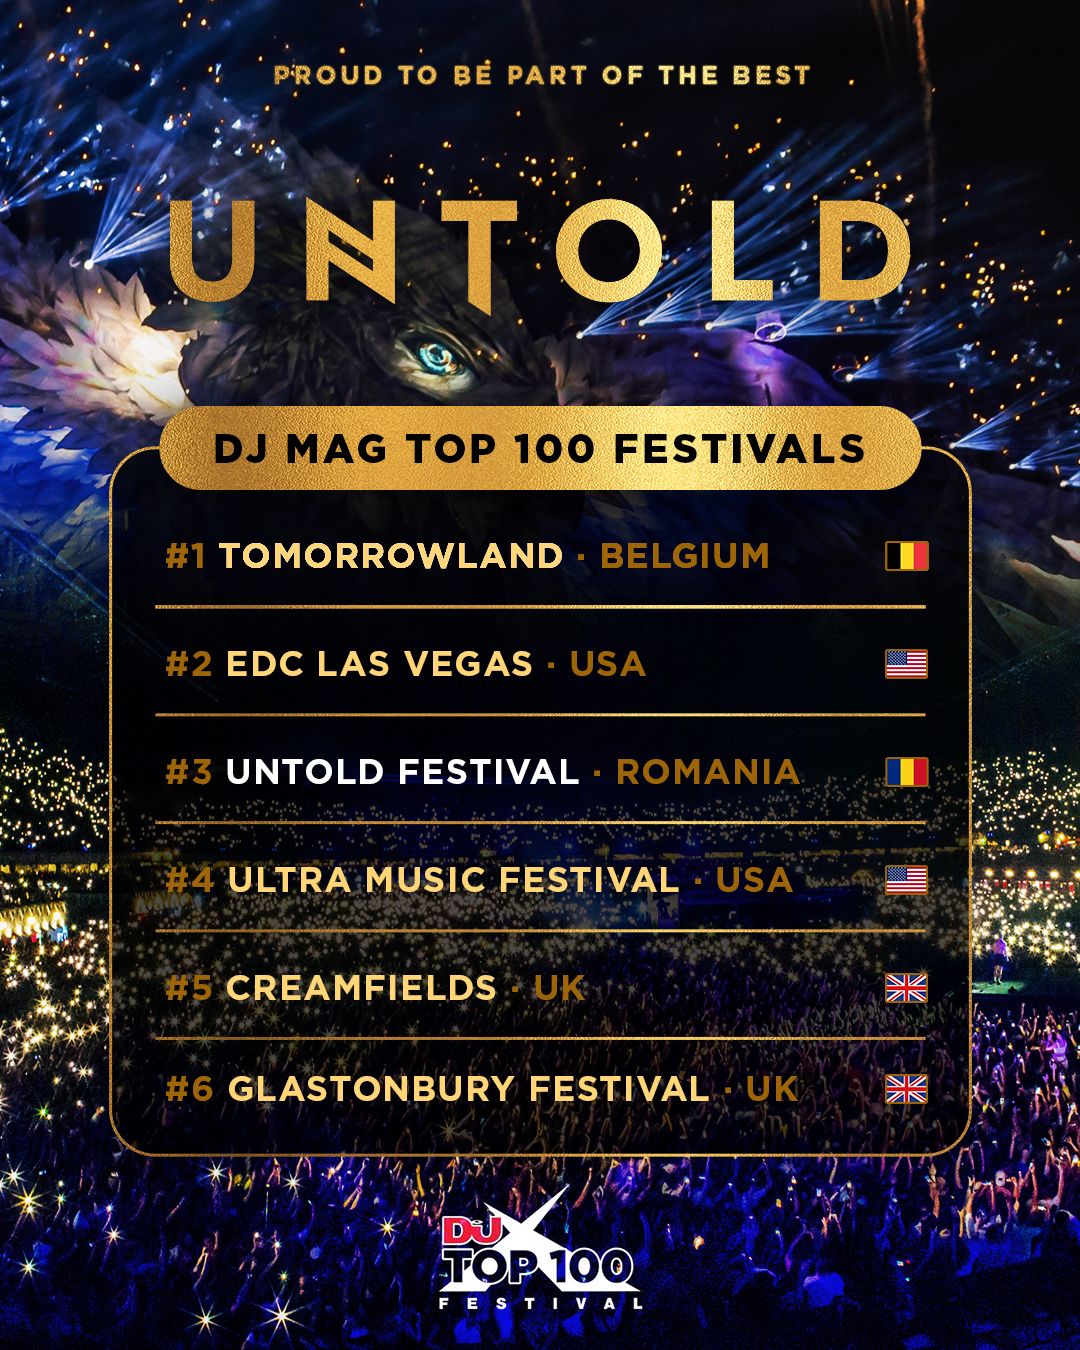 DJ MAG TOP 100 Festival is out – UNTOLD reach the third place